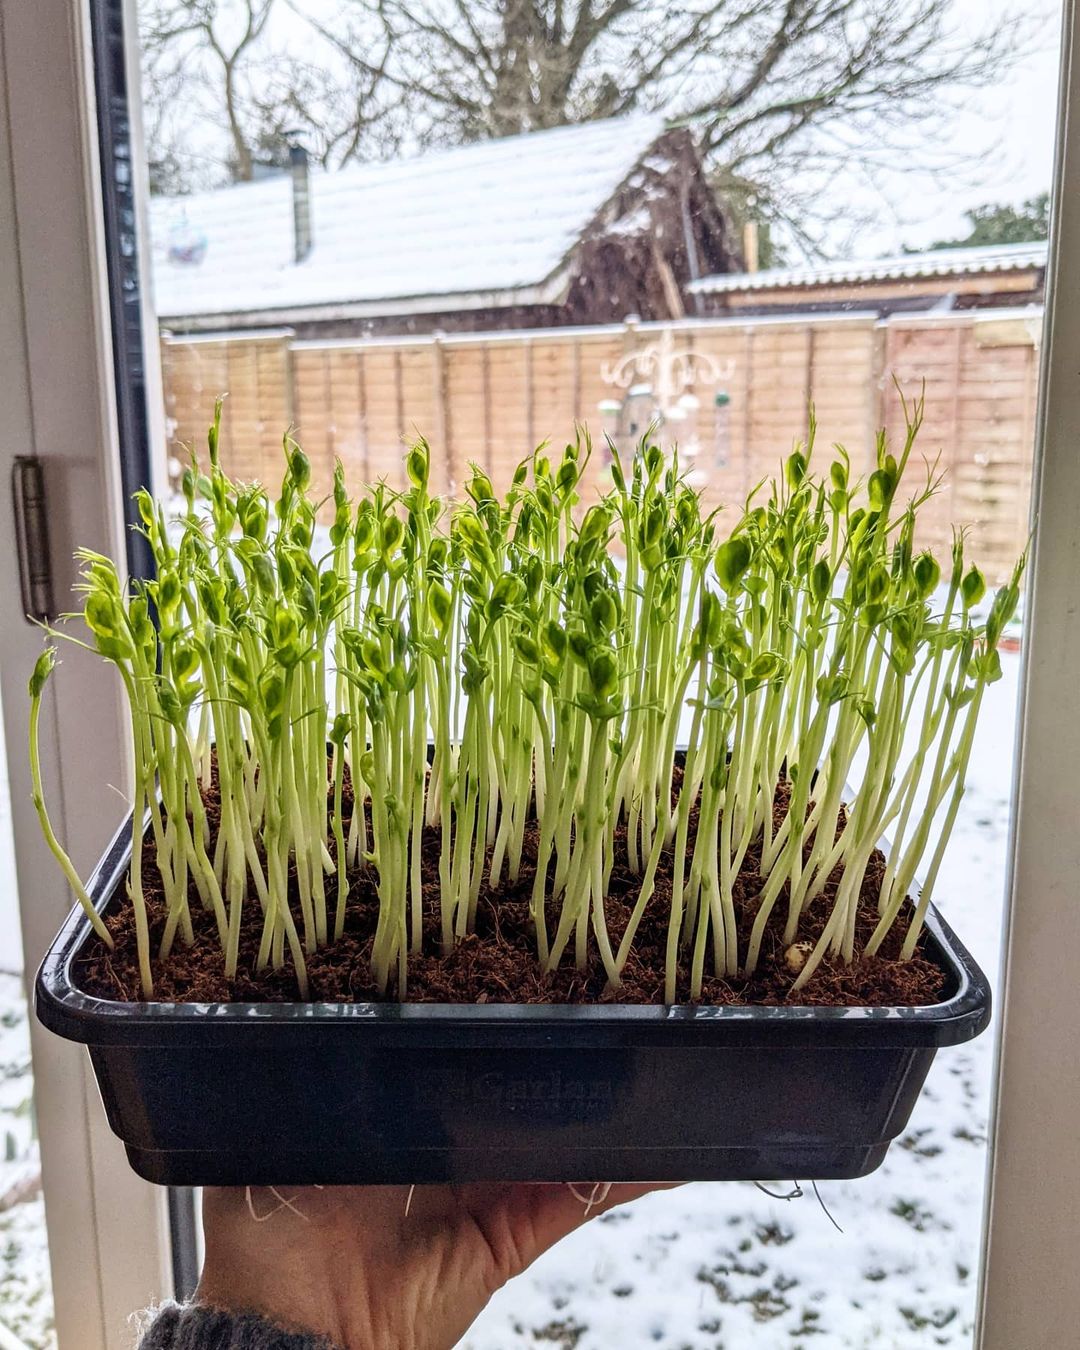 tray of microgreens with snow in the background